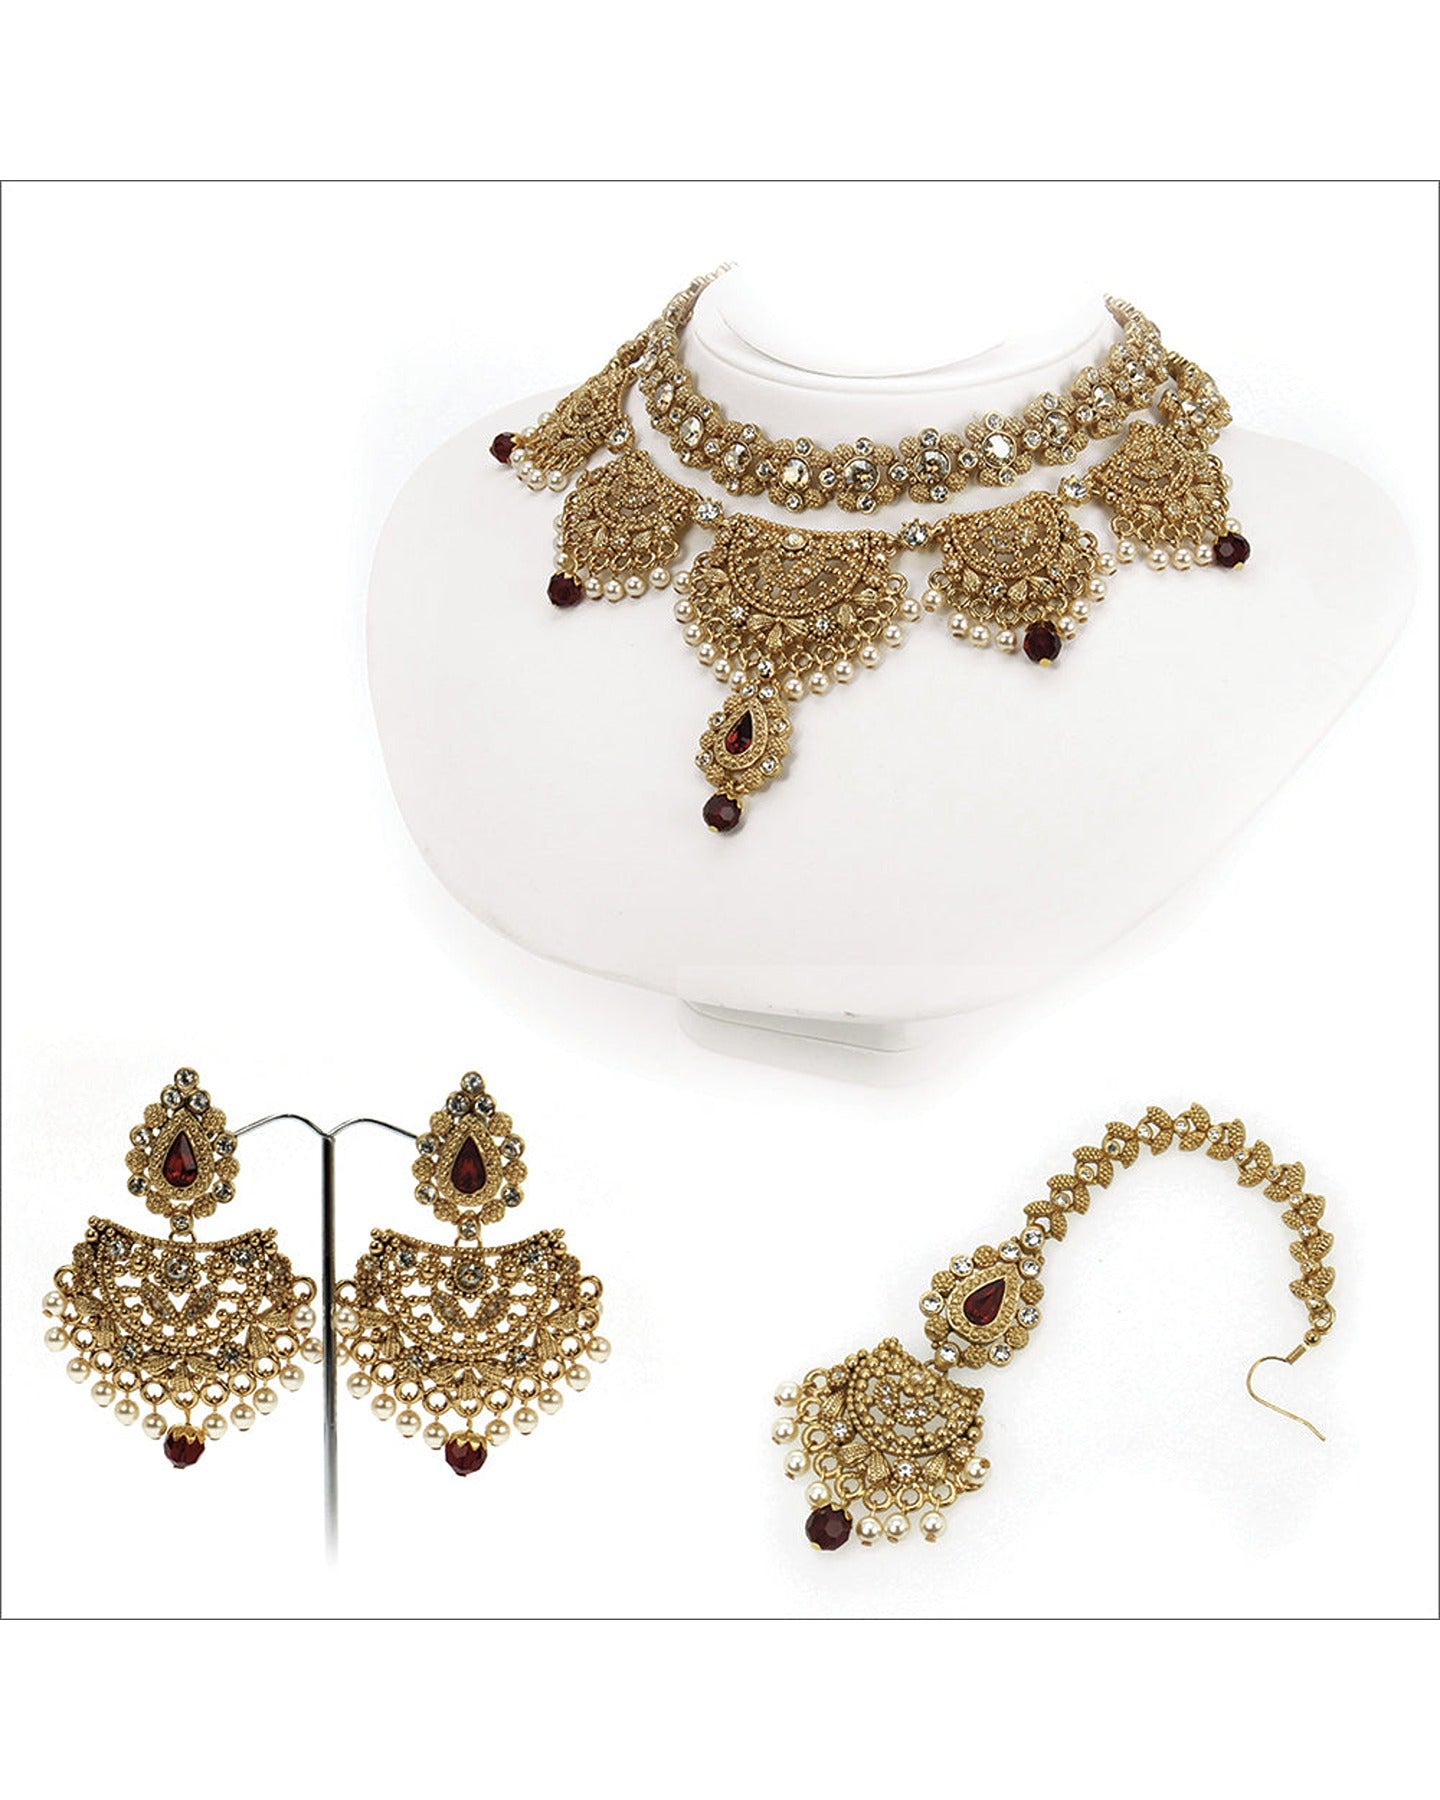 Antique Gold Jewelry with Siam Red and Crystal Golden Shadow Stones